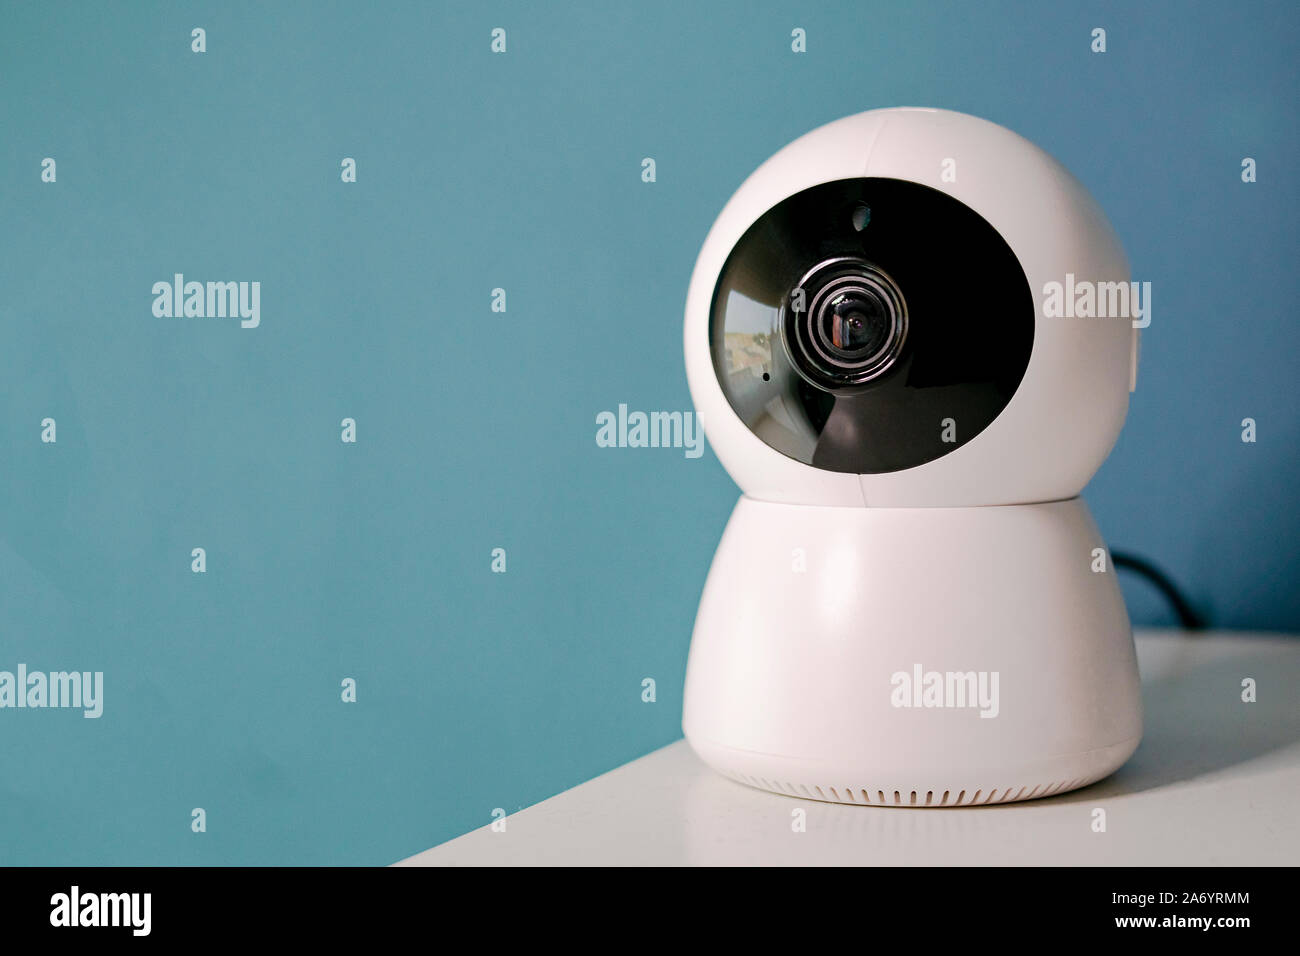 webcam with white moving head with black protections covering the lens and infrared light bulbs for night lighting Stock Photo